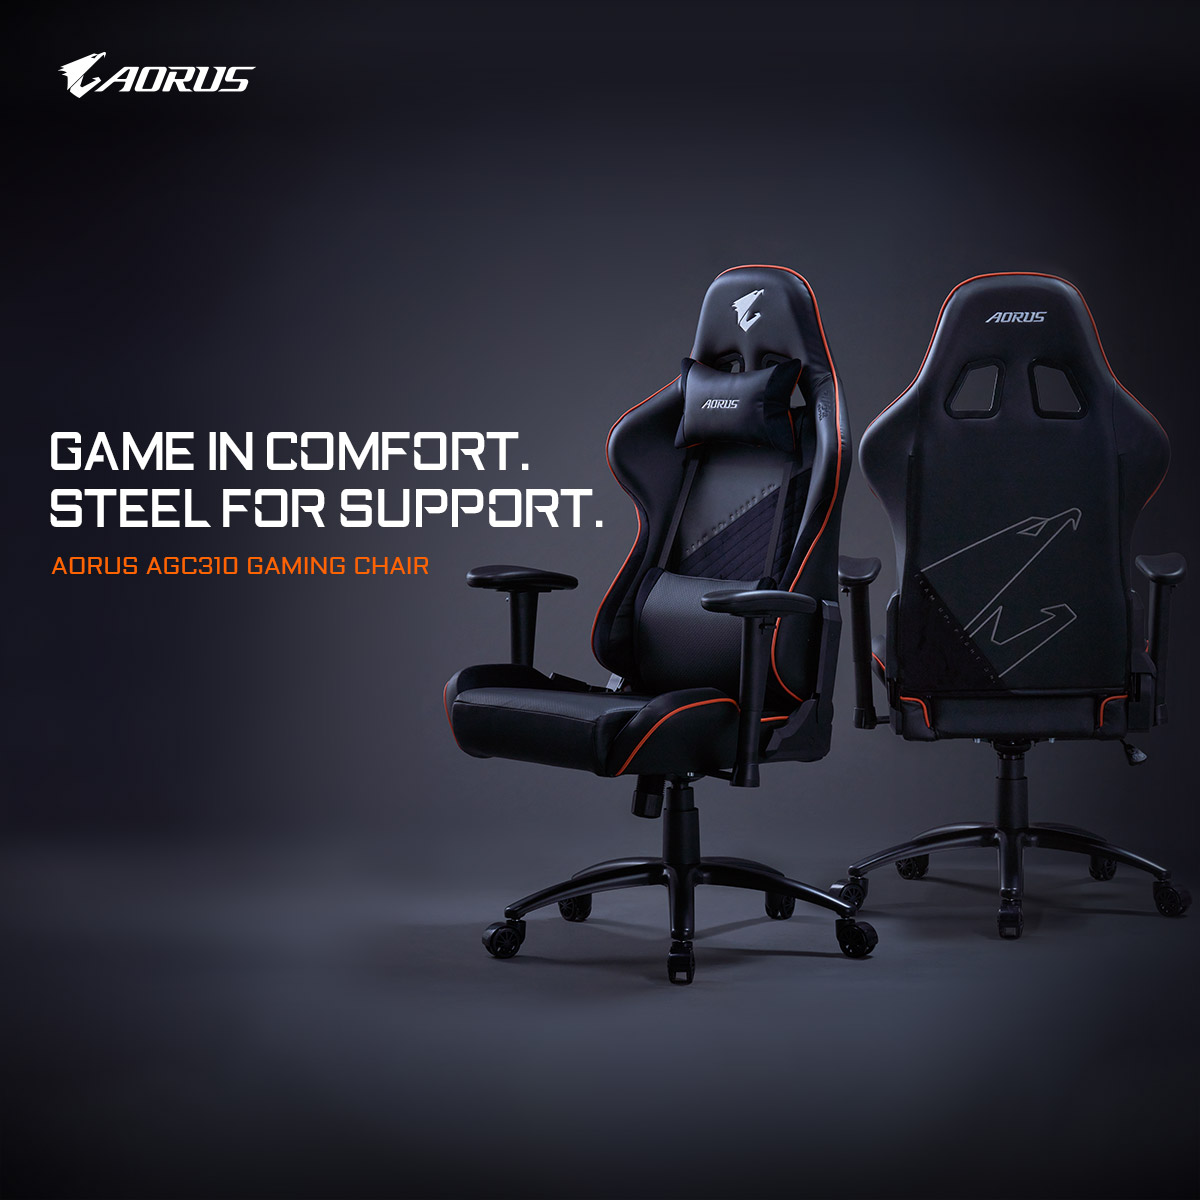 GIGABYTE Launches the New Gaming Chair– AORUS AGC310